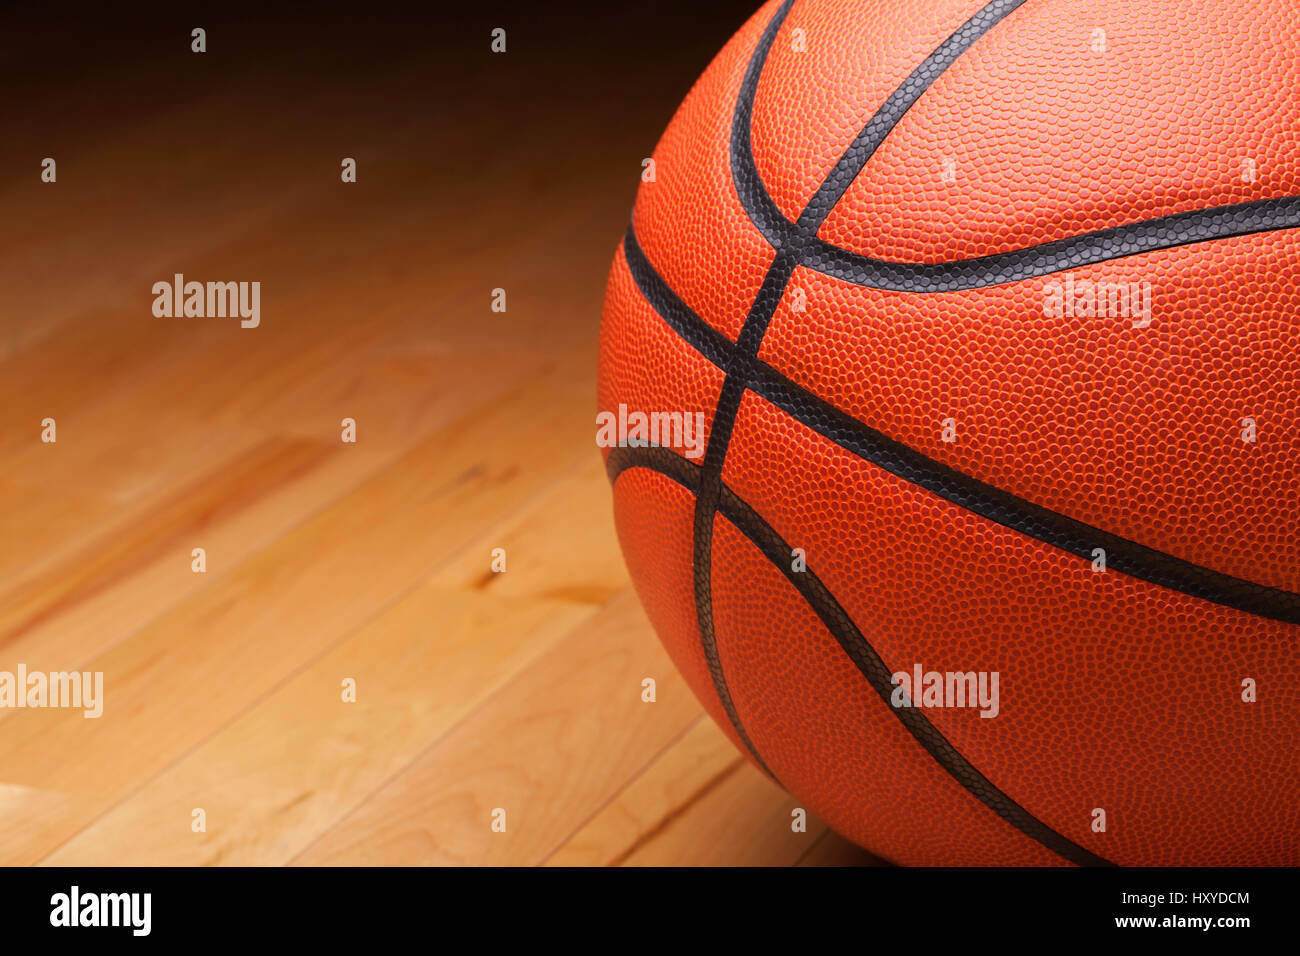 Close up shot of a basketball on a hardwood gym floor Stock Photo